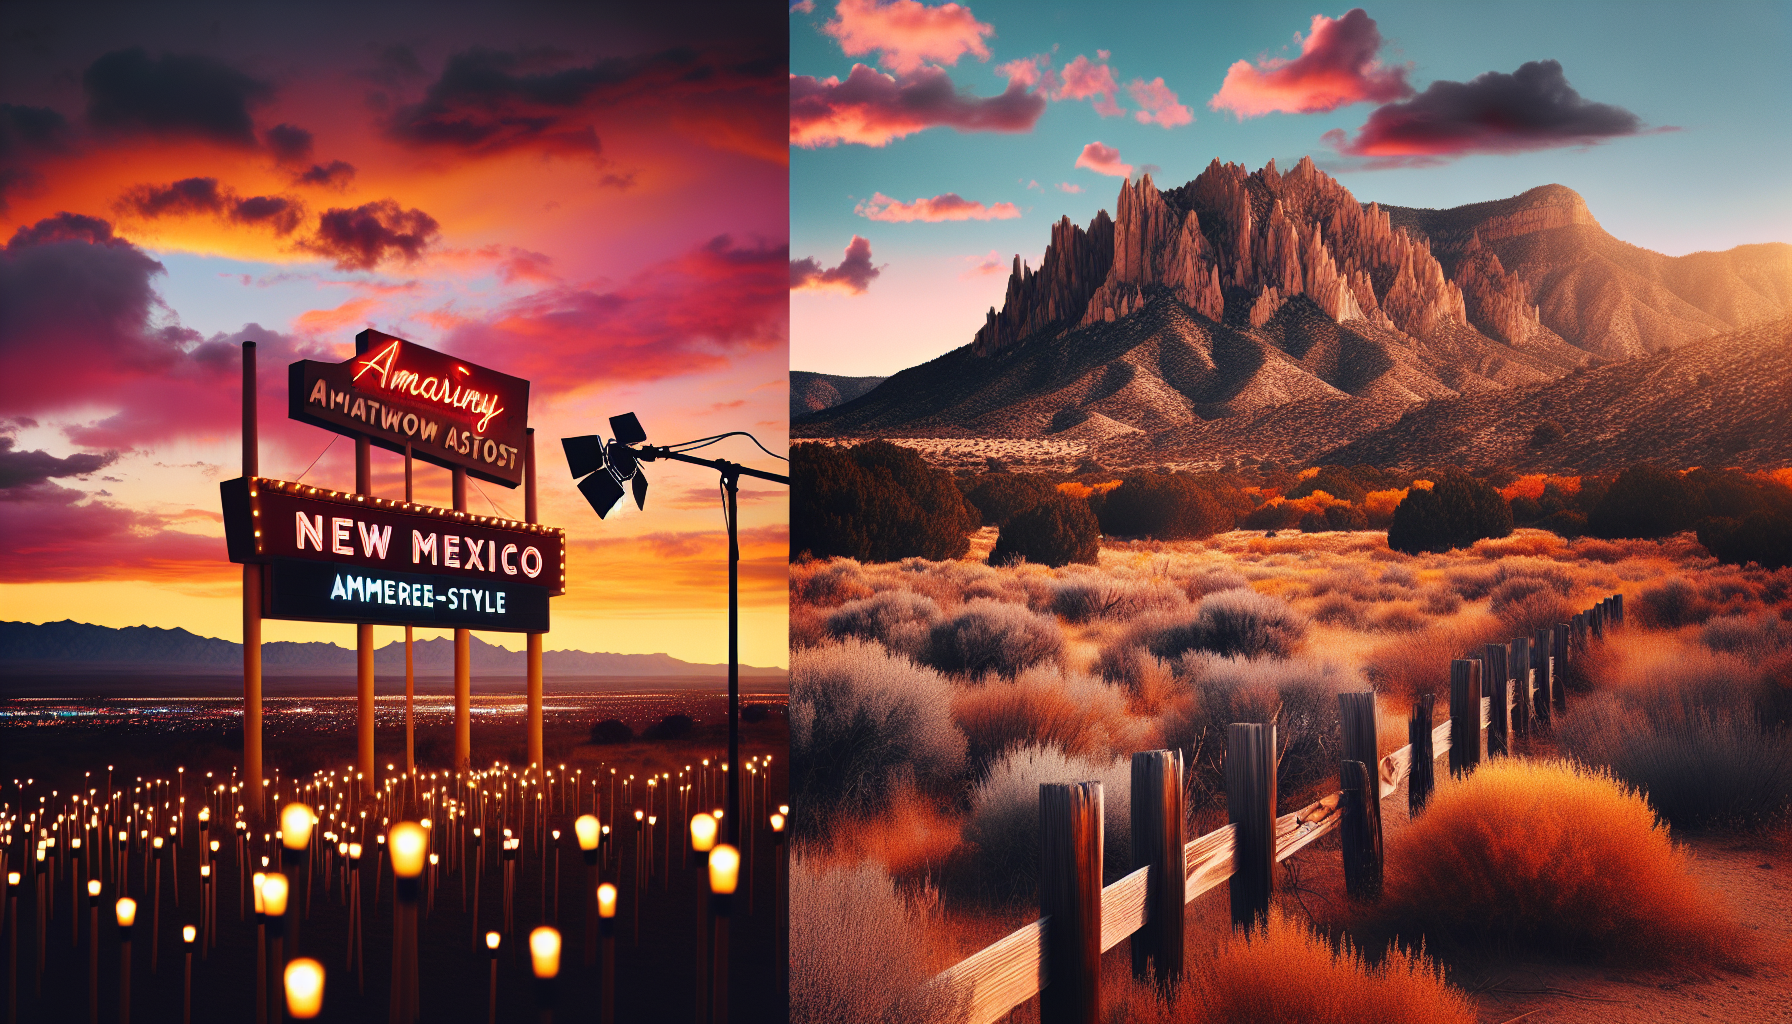 discover how netflix is creating the future of entertainment in the middle of the new mexico desert, potentially building the next hollywood.